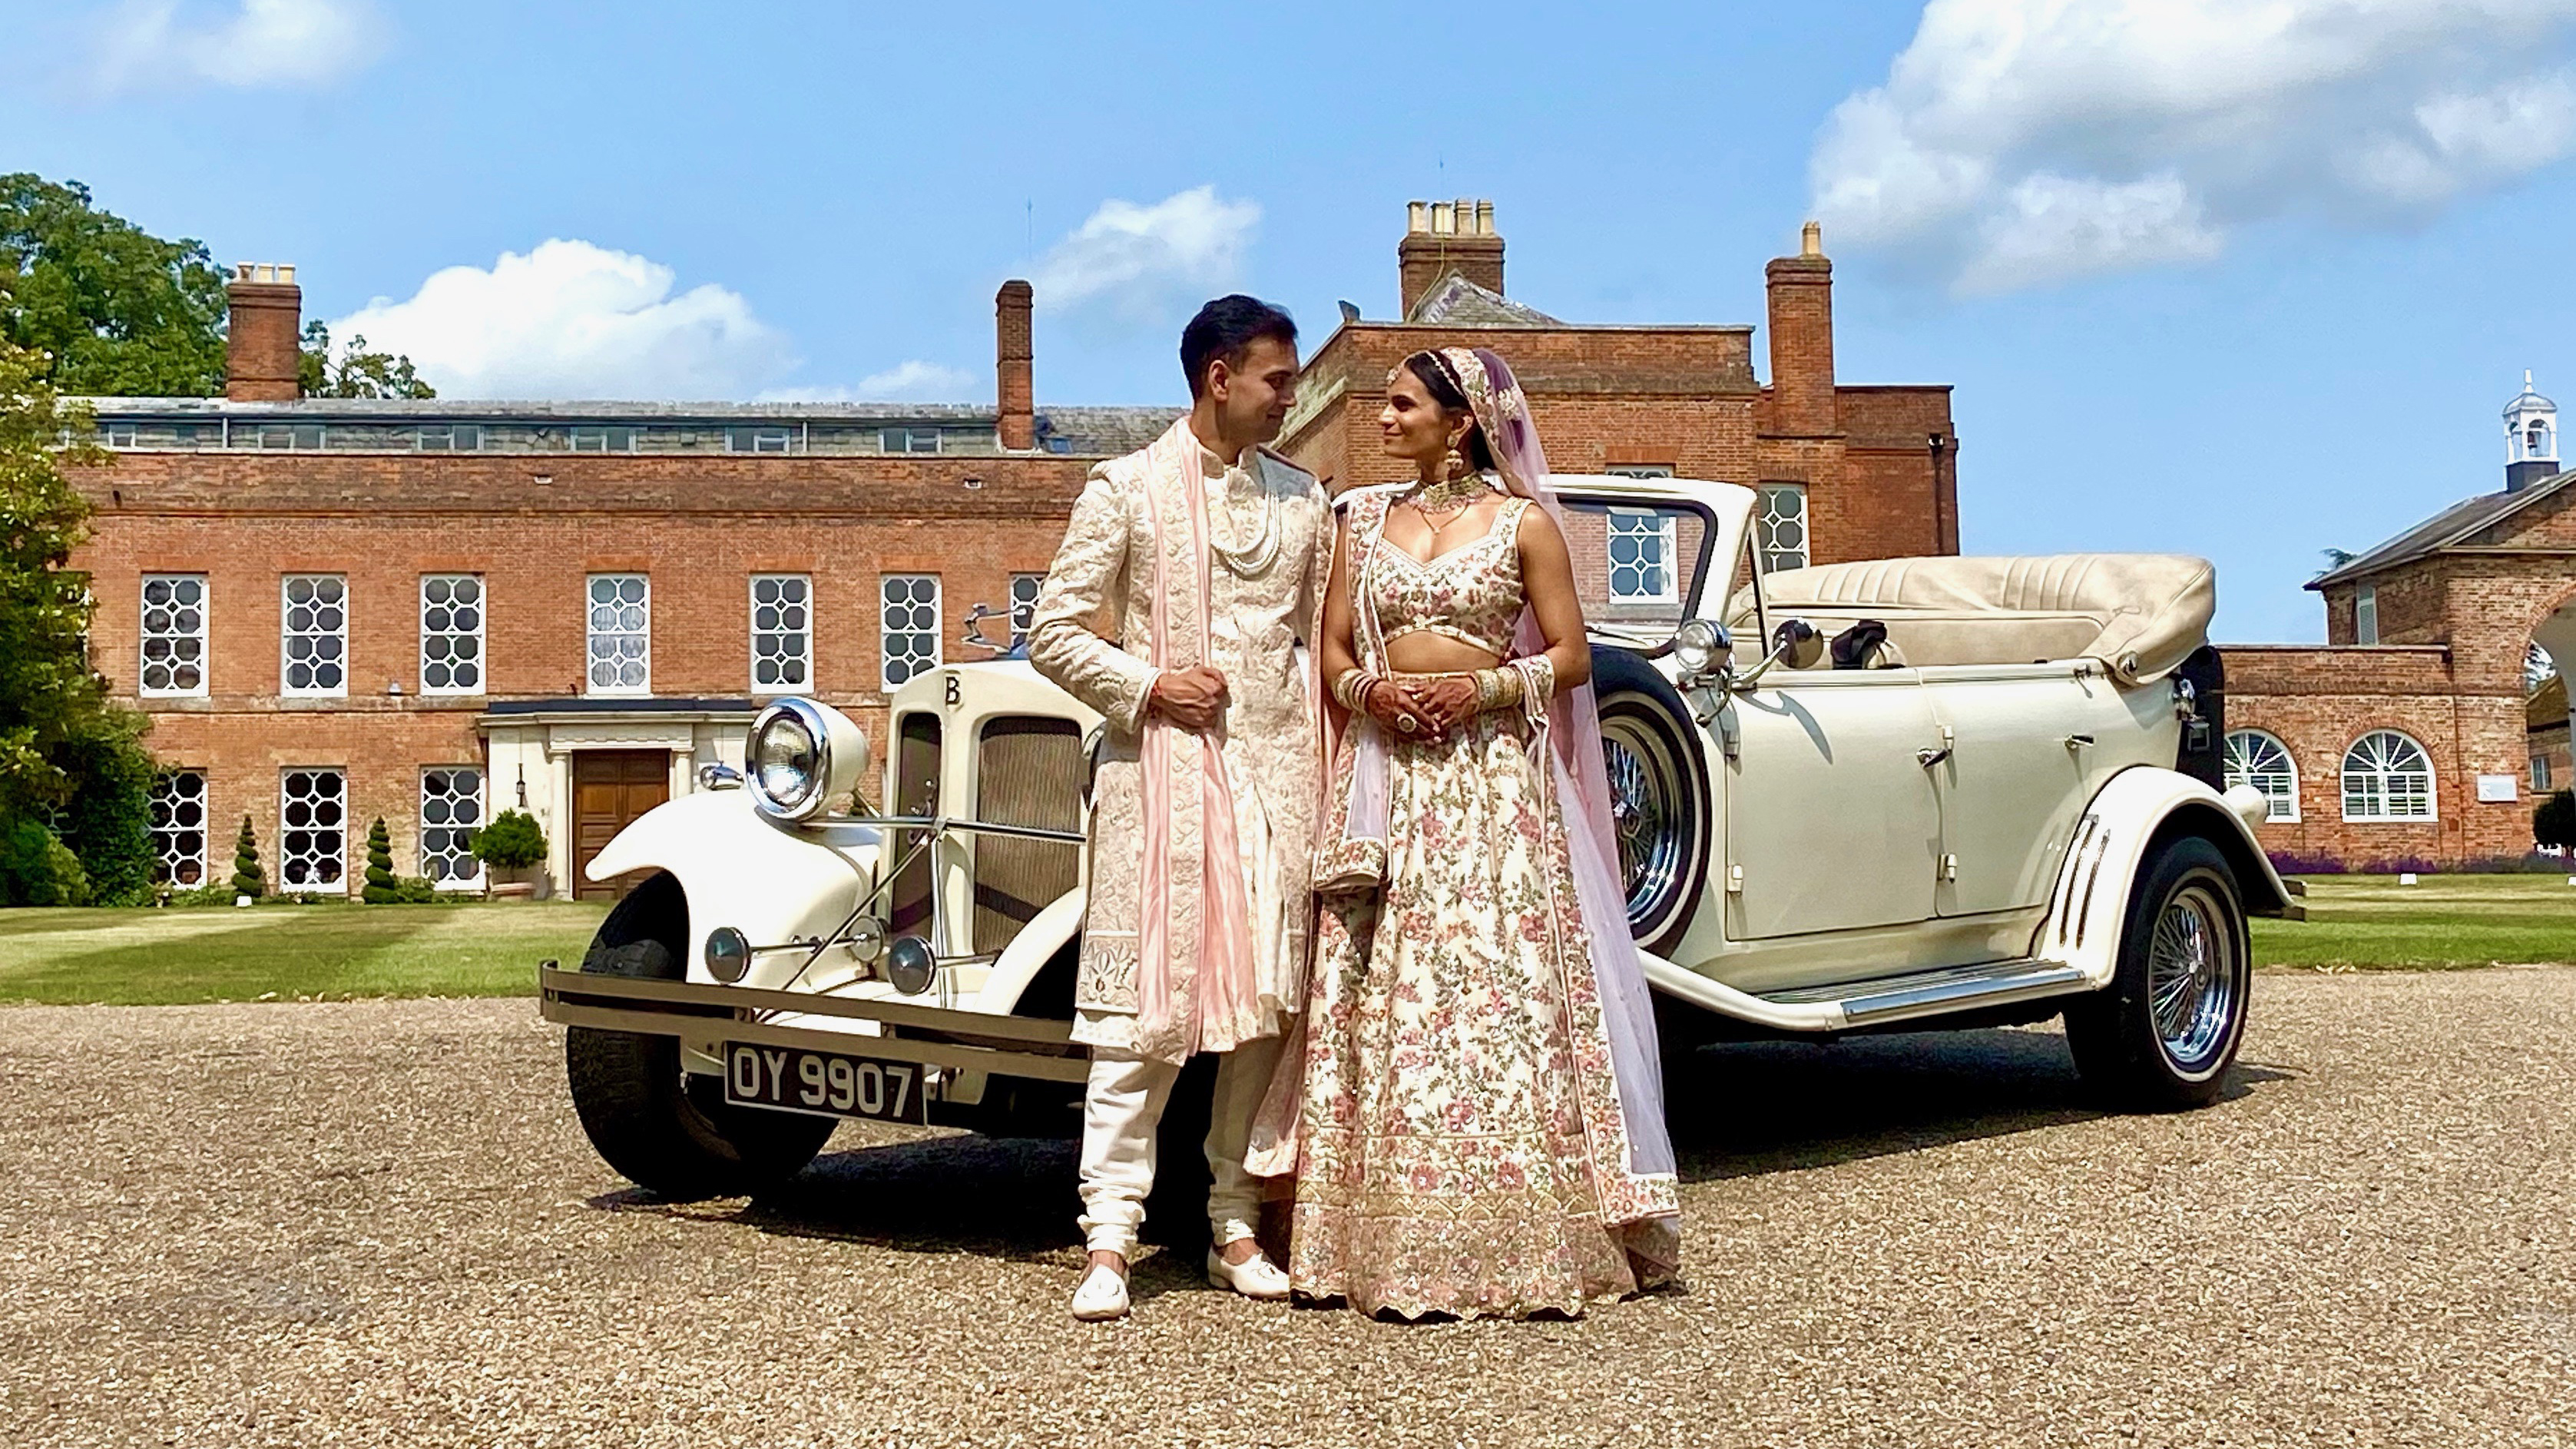 Convertible vintage style Beauford with roof down with newly wed Asian couple standing in front of the vehicle looking at each others. Vehicle is parked in front of a large manor house in Uxbridge